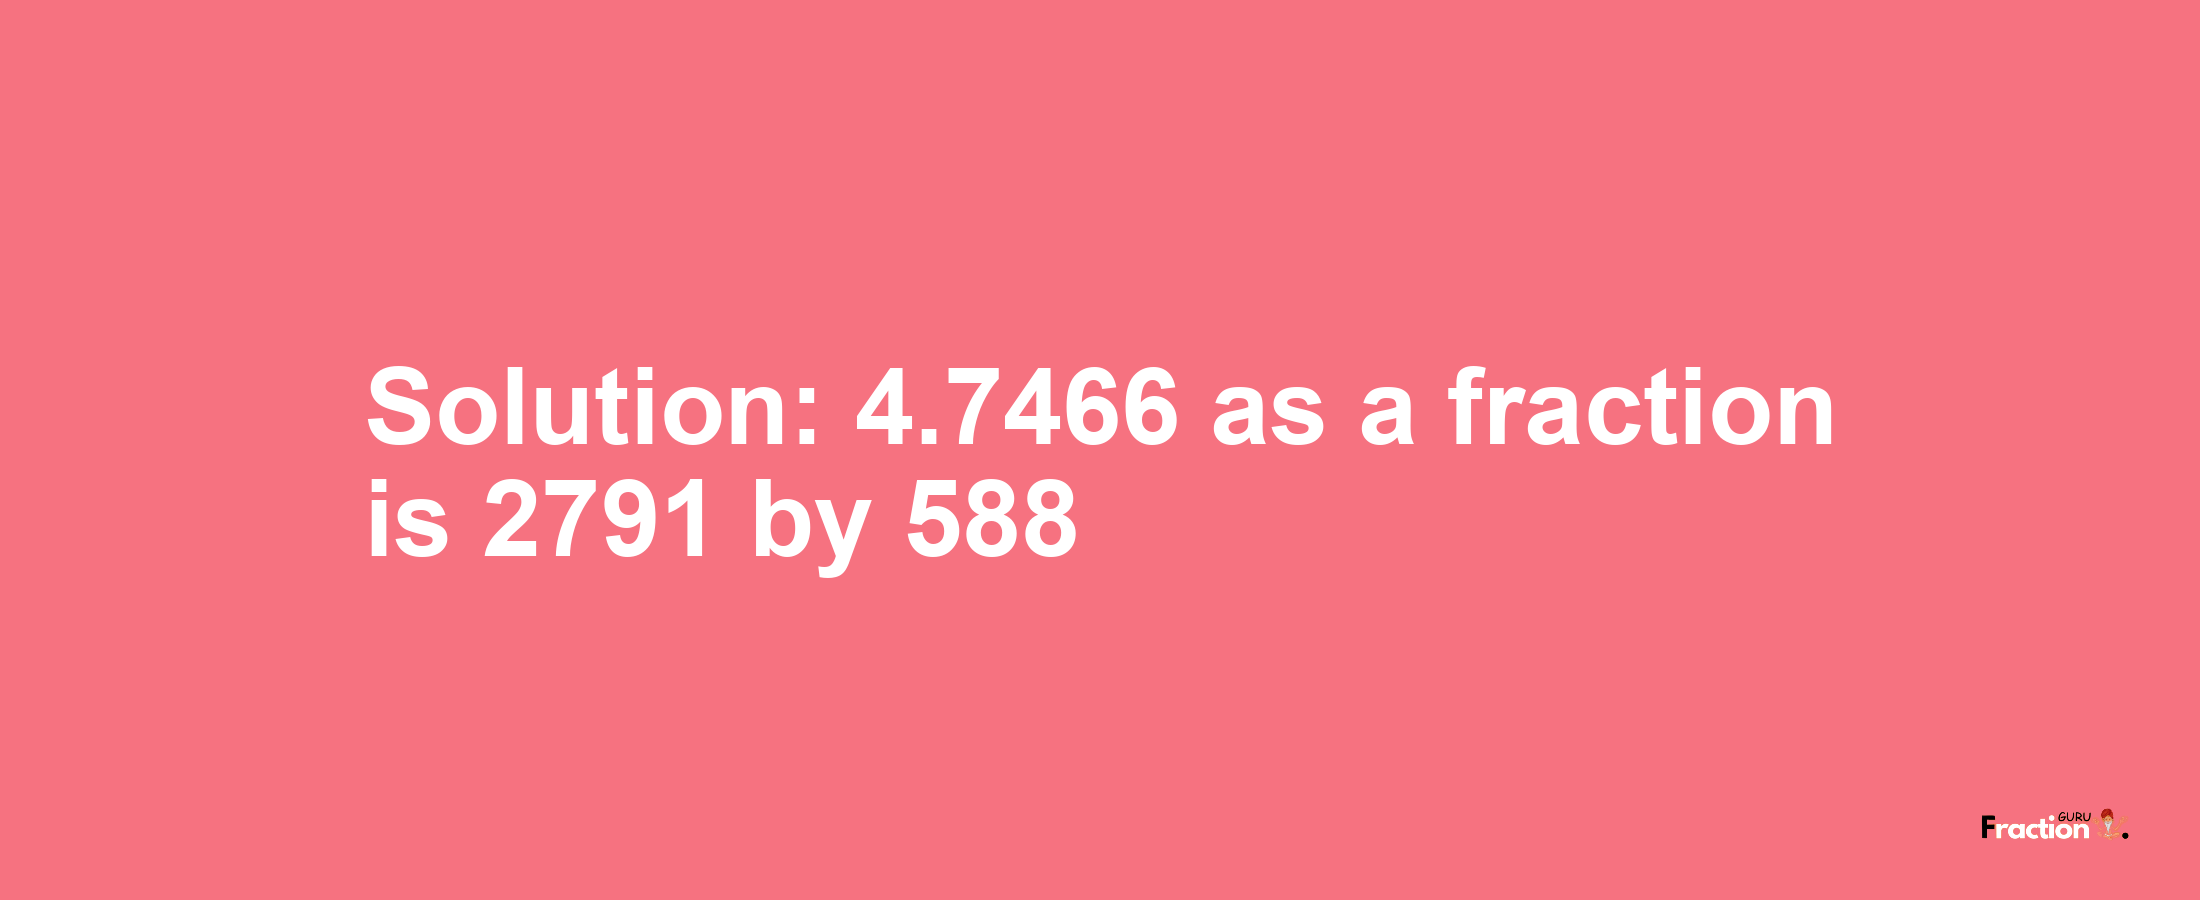 Solution:4.7466 as a fraction is 2791/588